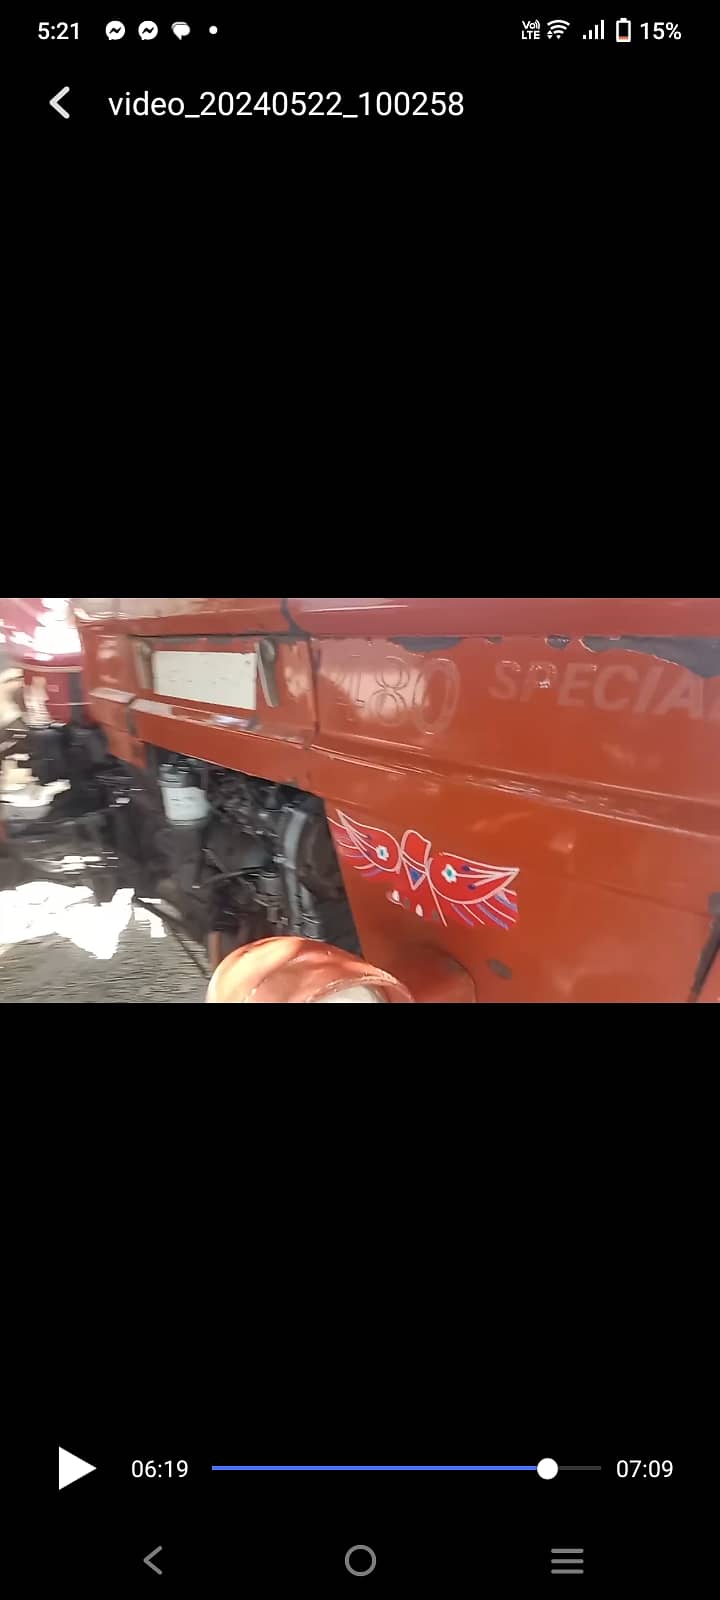 fiat480tractor for sale model1981 5